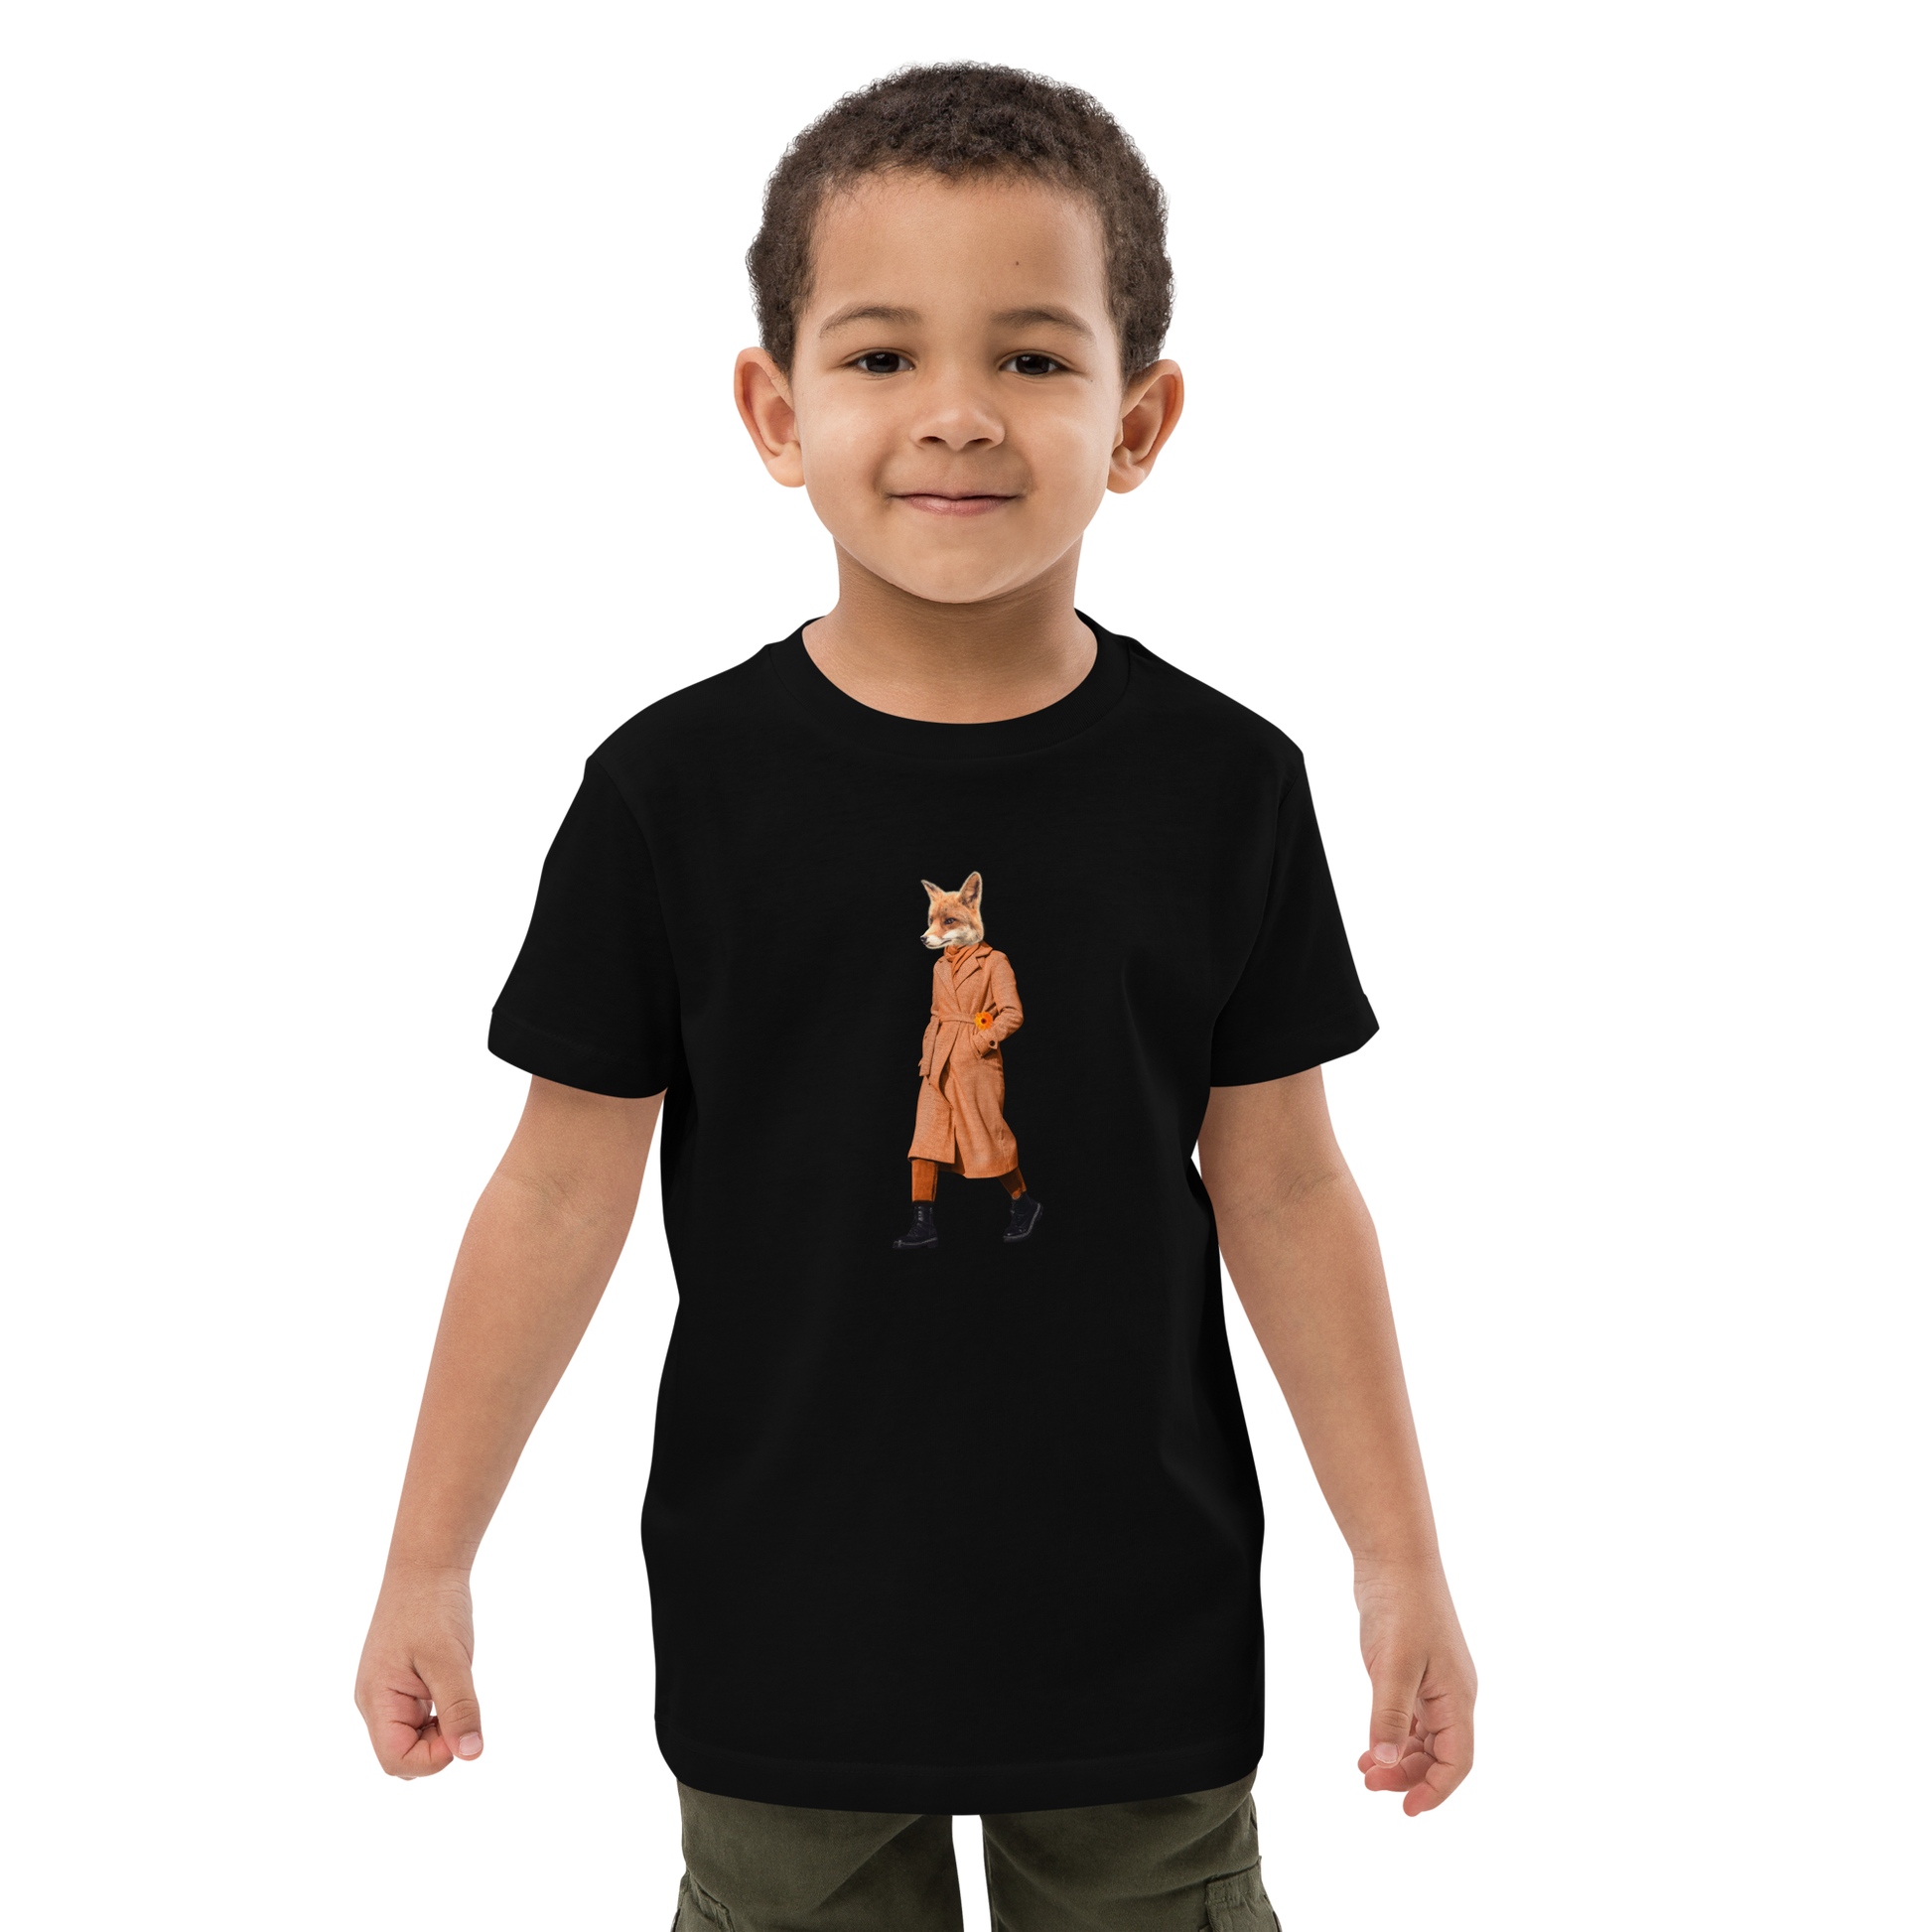 Young boy wearing a Black Anthropomorphic Fox Organic Cotton Kids T-Shirt featuring an Anthropomorphic Fox In a Trench Coat graphic on the chest - Kids' Graphic Tees - Funny Animal T-Shirts - Boozy Fox